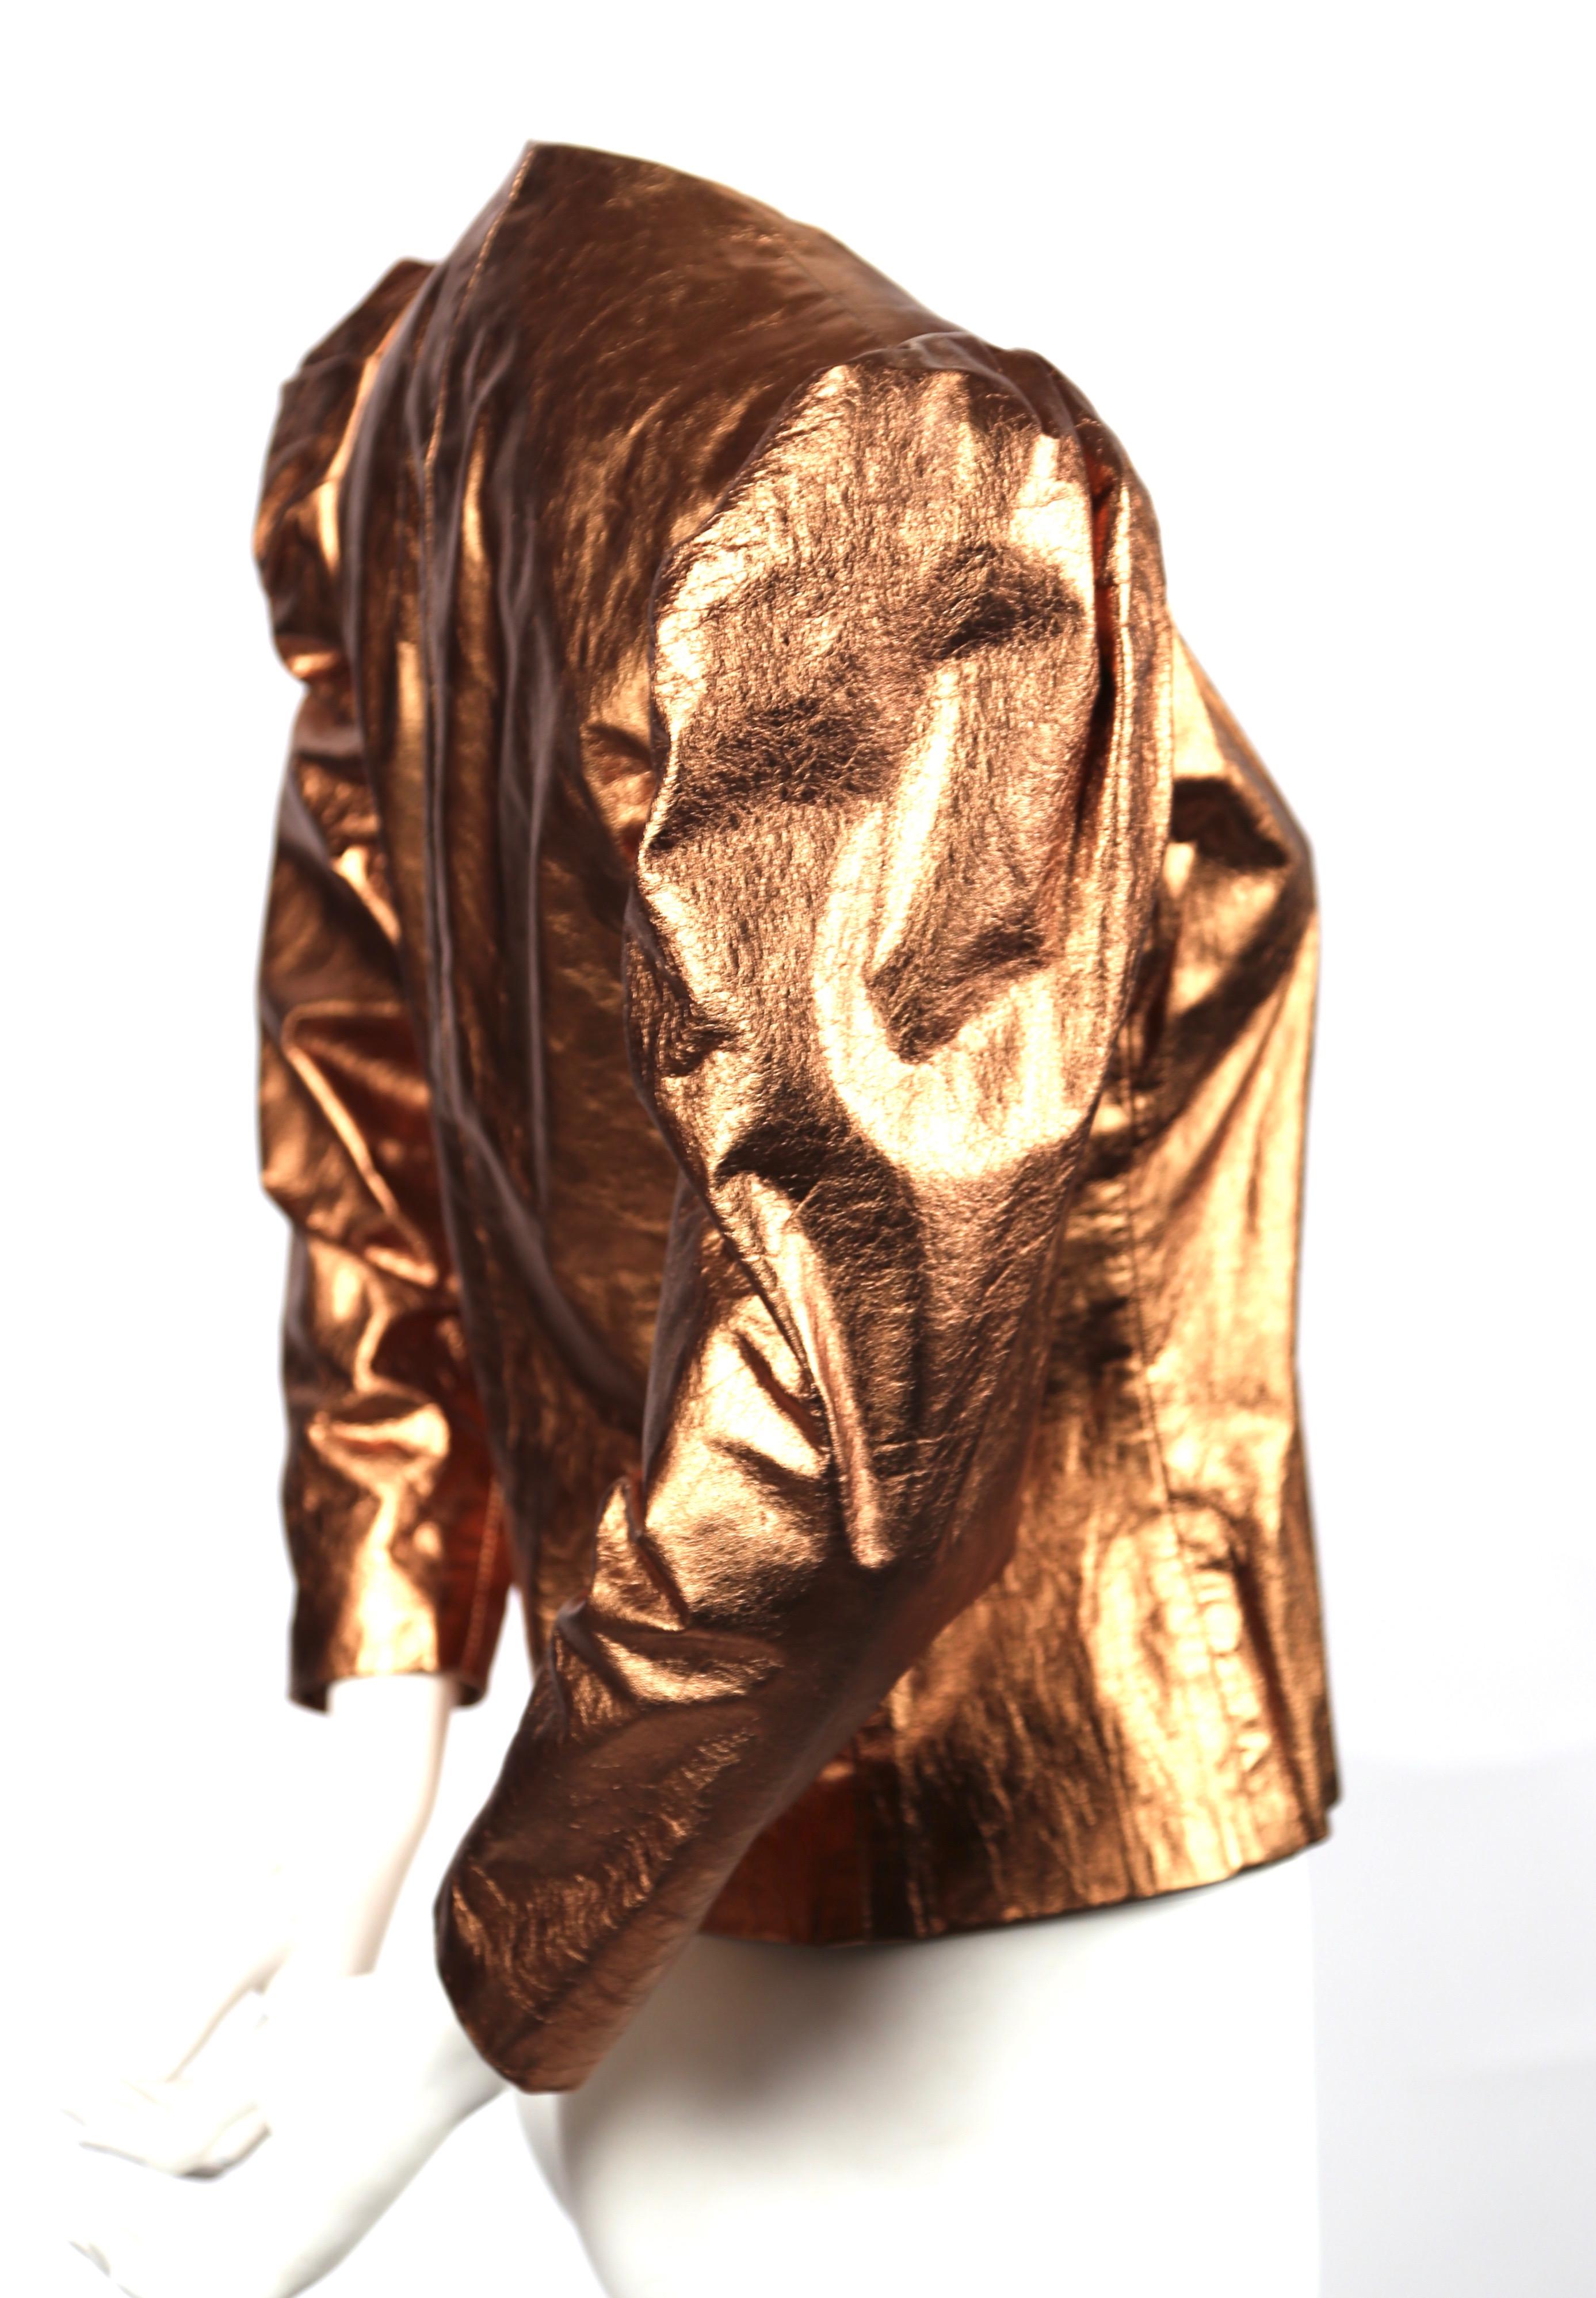 Dramatic, metallic-copper leather jacket with pleated puff sleeves designed by Bill Blass dating to the 1980's. U.S. size 4. Approximate measurements: shoulder 16